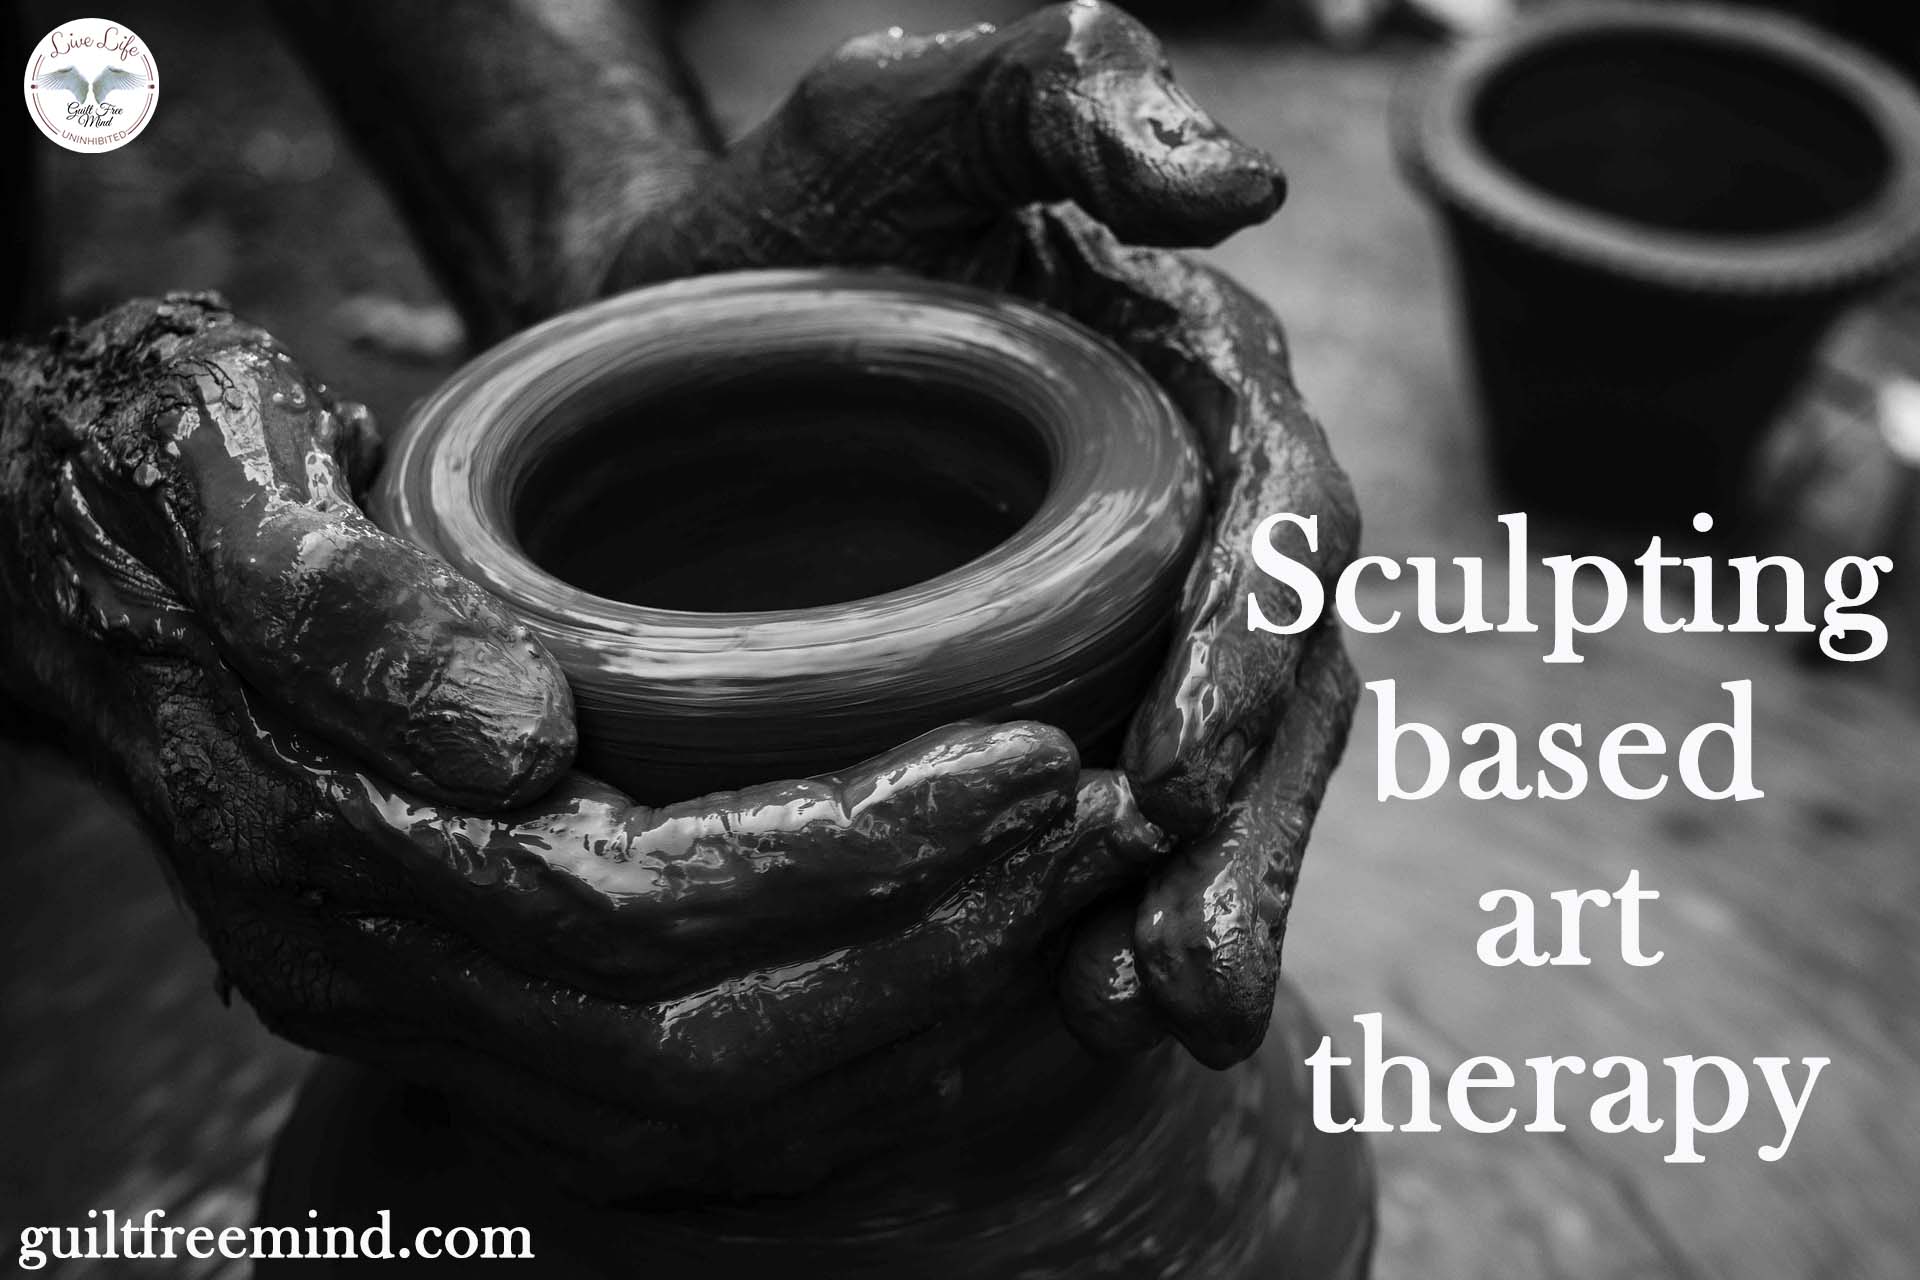 Effects of sculpting based art therapy